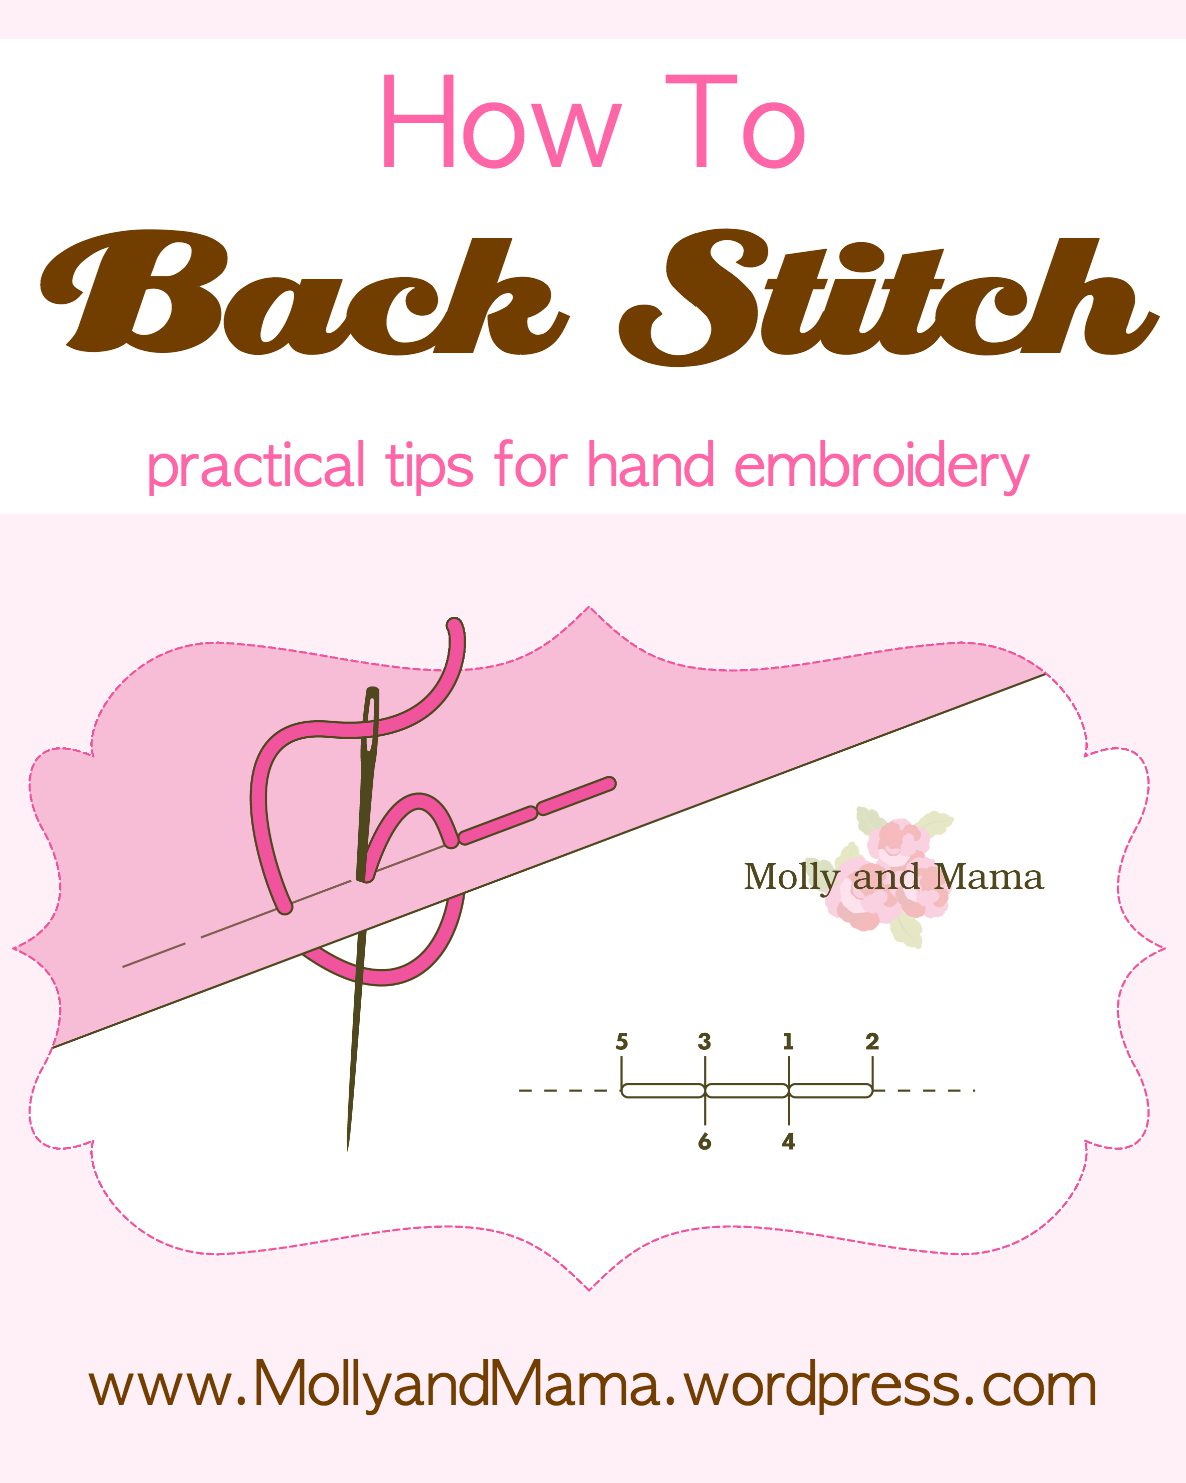 Tips for Working with Embroidery Floss